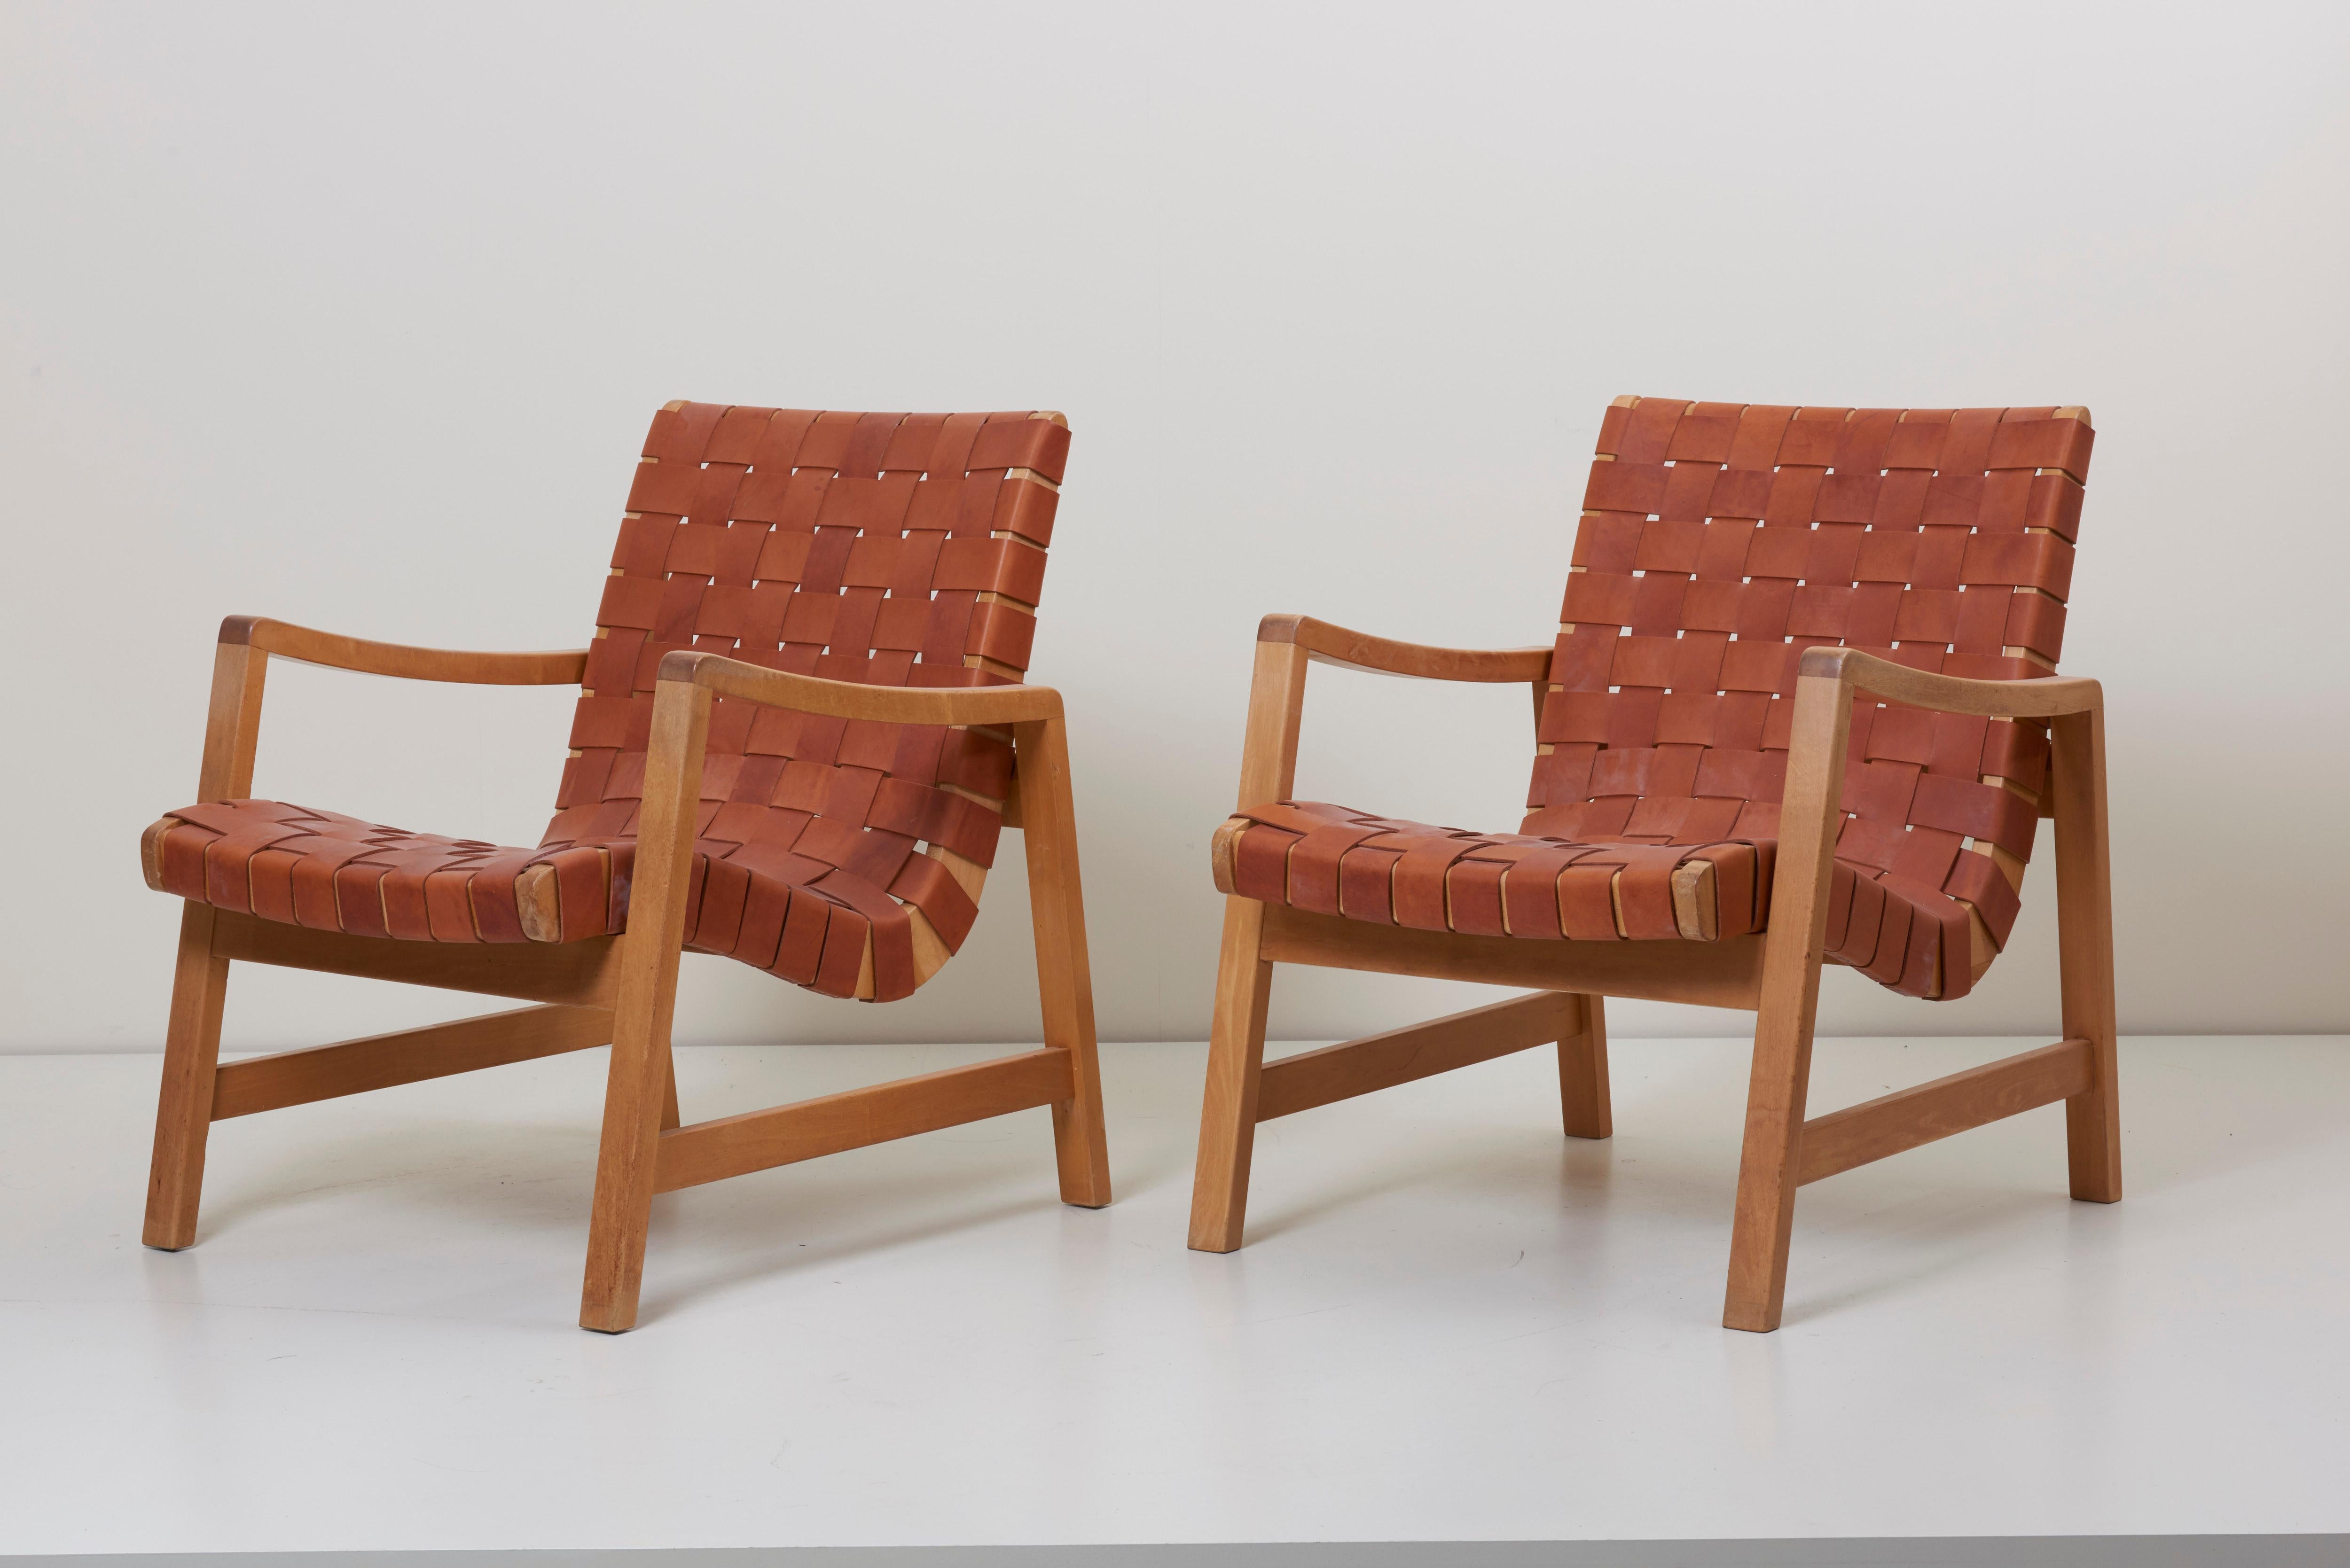 Set of two early Jens Risom armchairs by Knoll (labeled) with new high quality leather webbing. Excellent vintage condition.